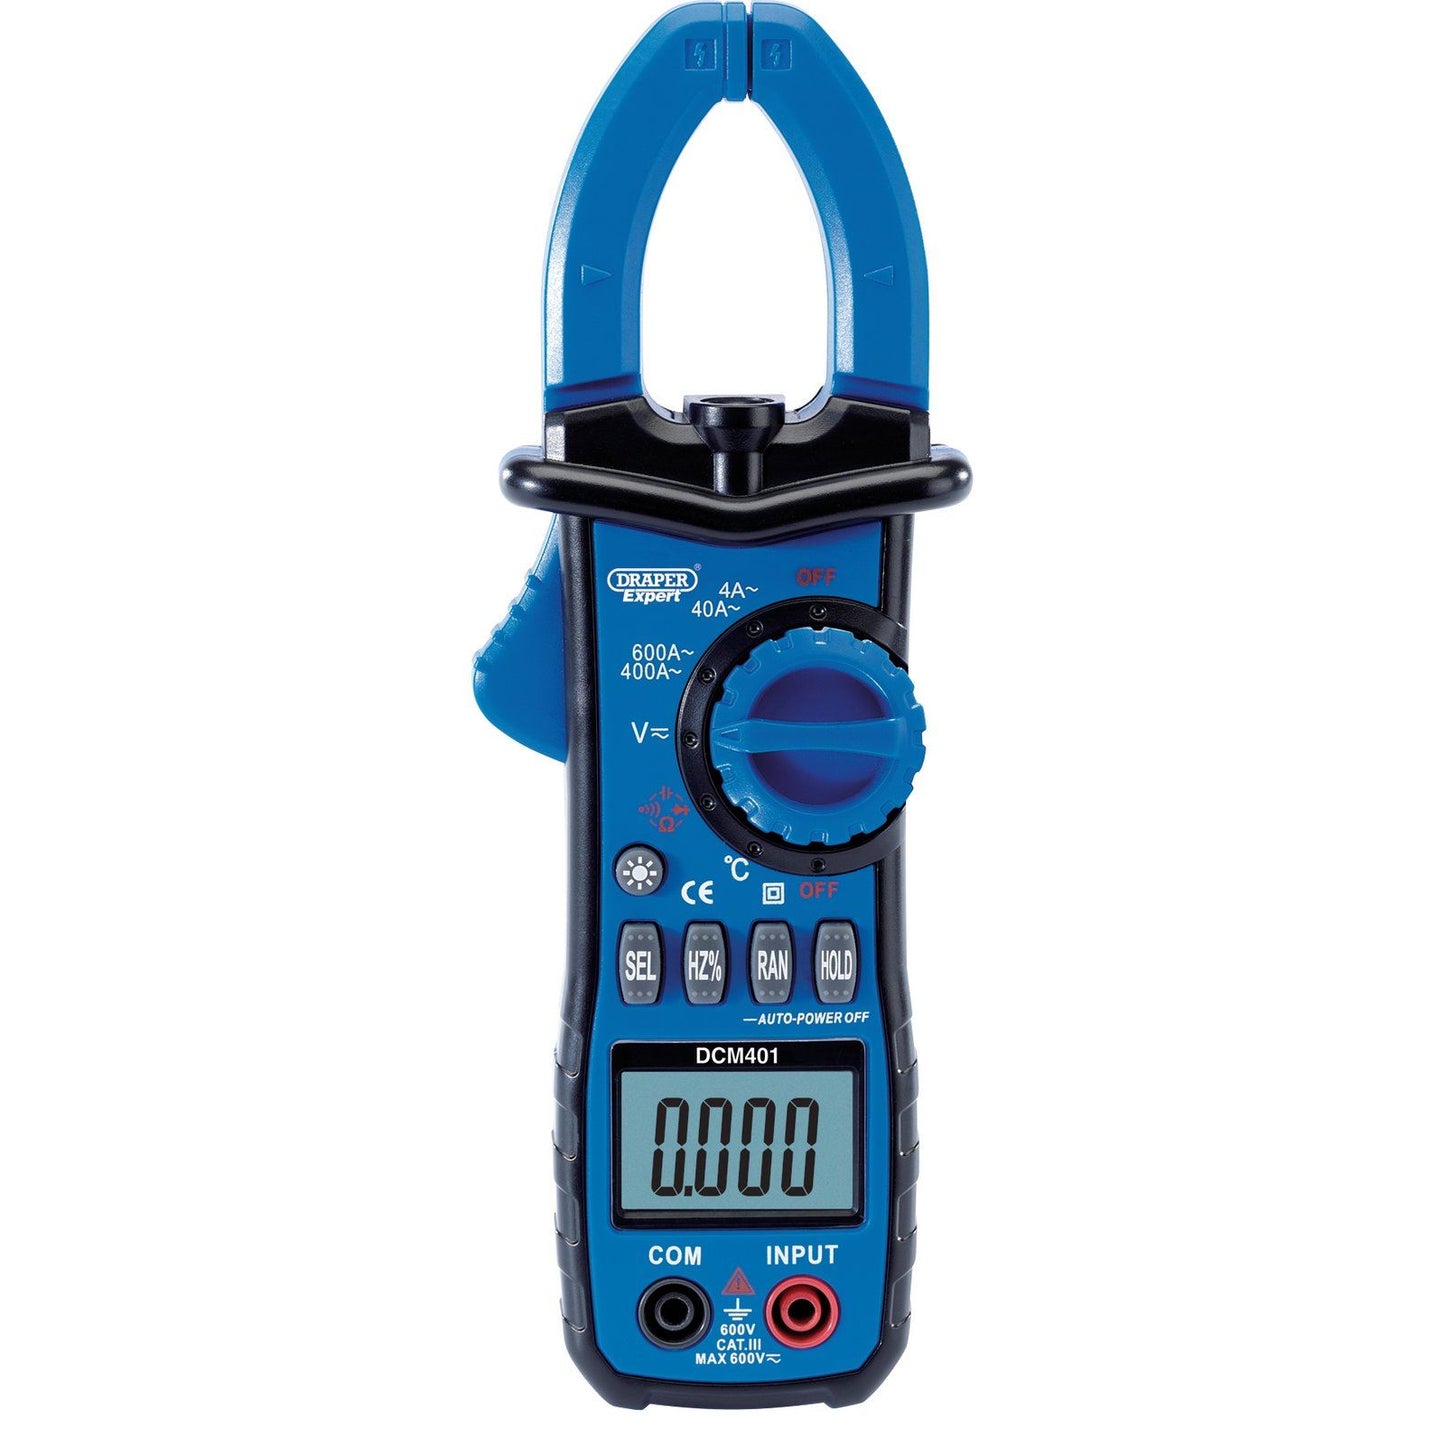 Draper Expert Quality Digital Clamp Meter With Backlit LCD Screen - Autoranging